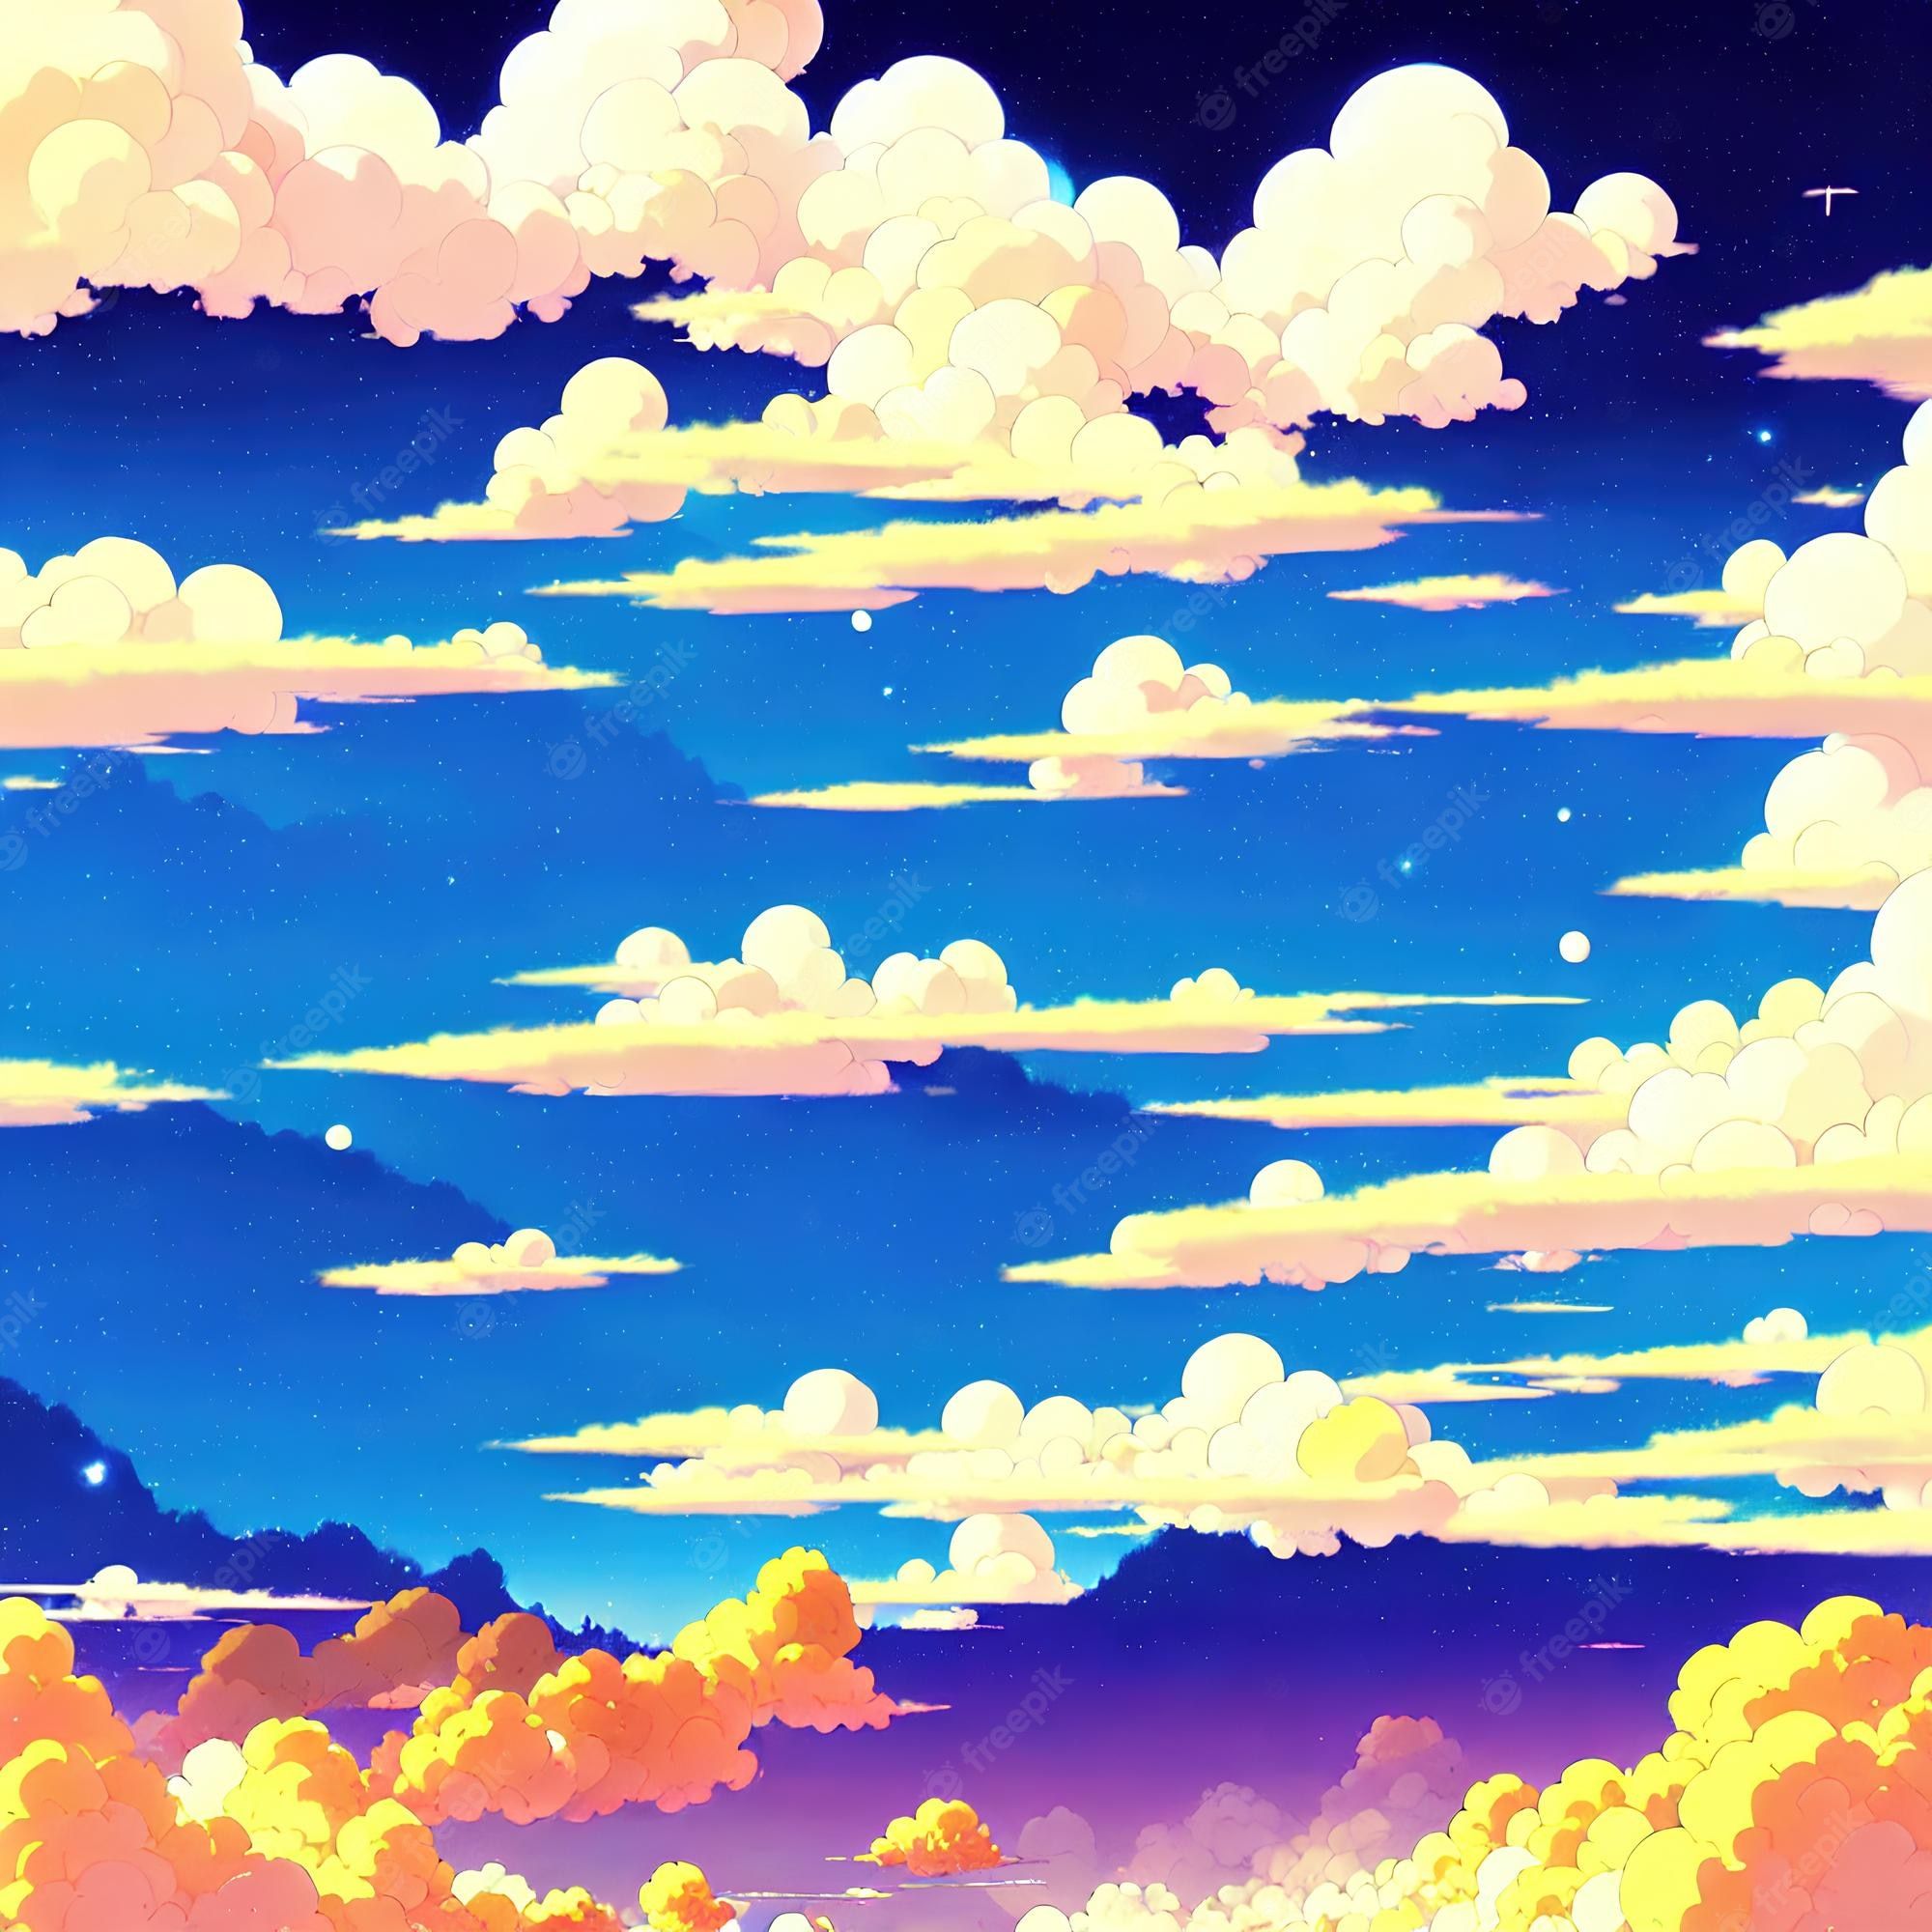 Illustration of the beautiful sky with clouds - Anime landscape